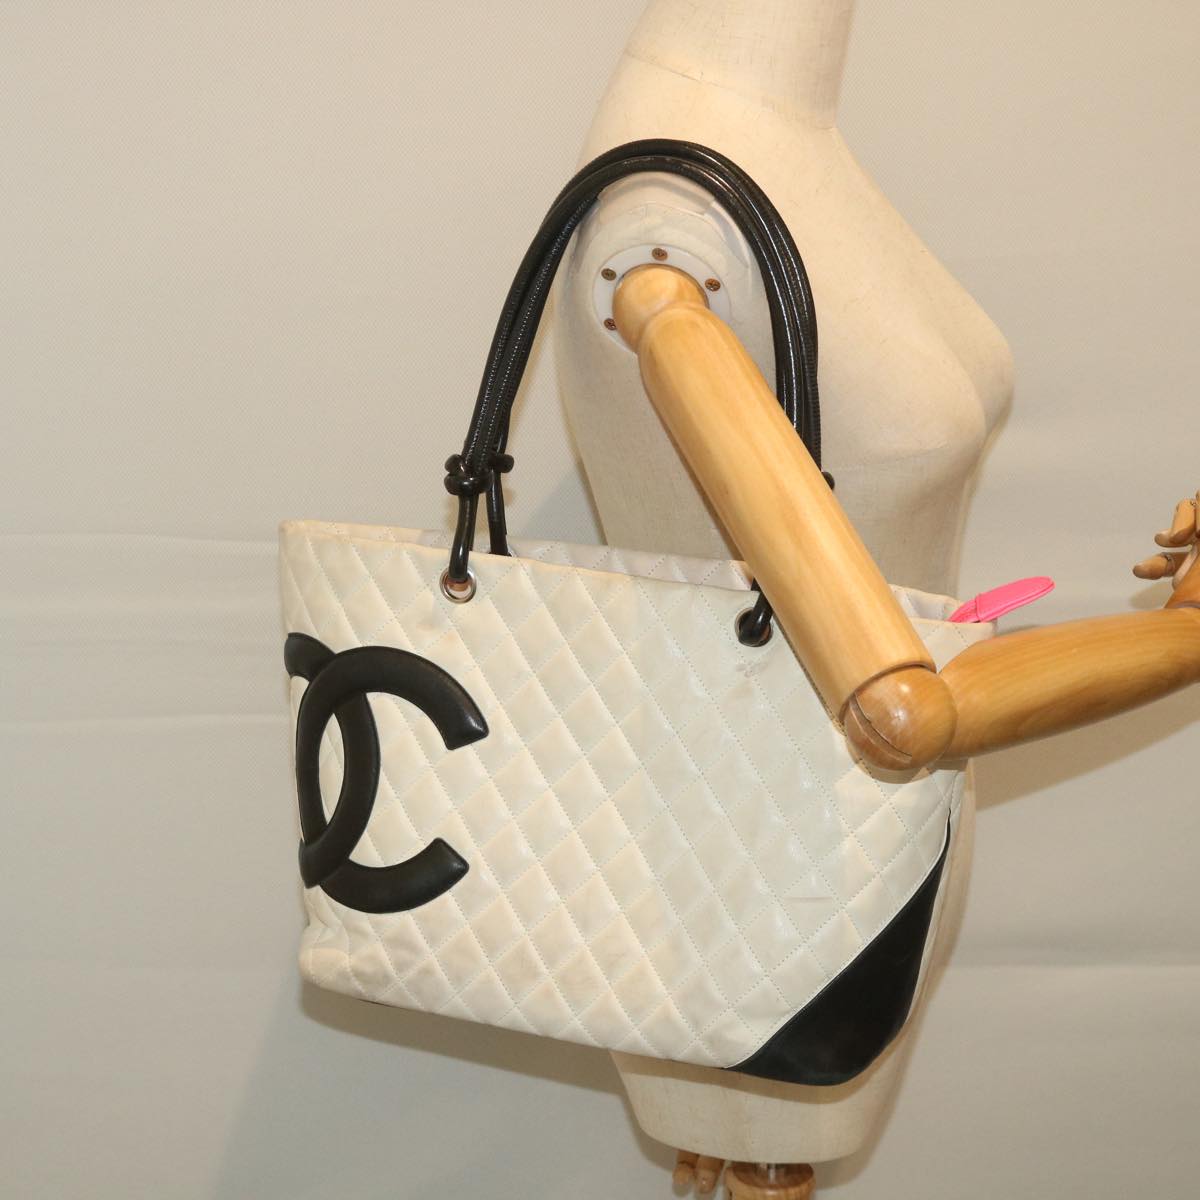 CHANEL Cambon Line Tote Bag Leather White CC Auth am5180